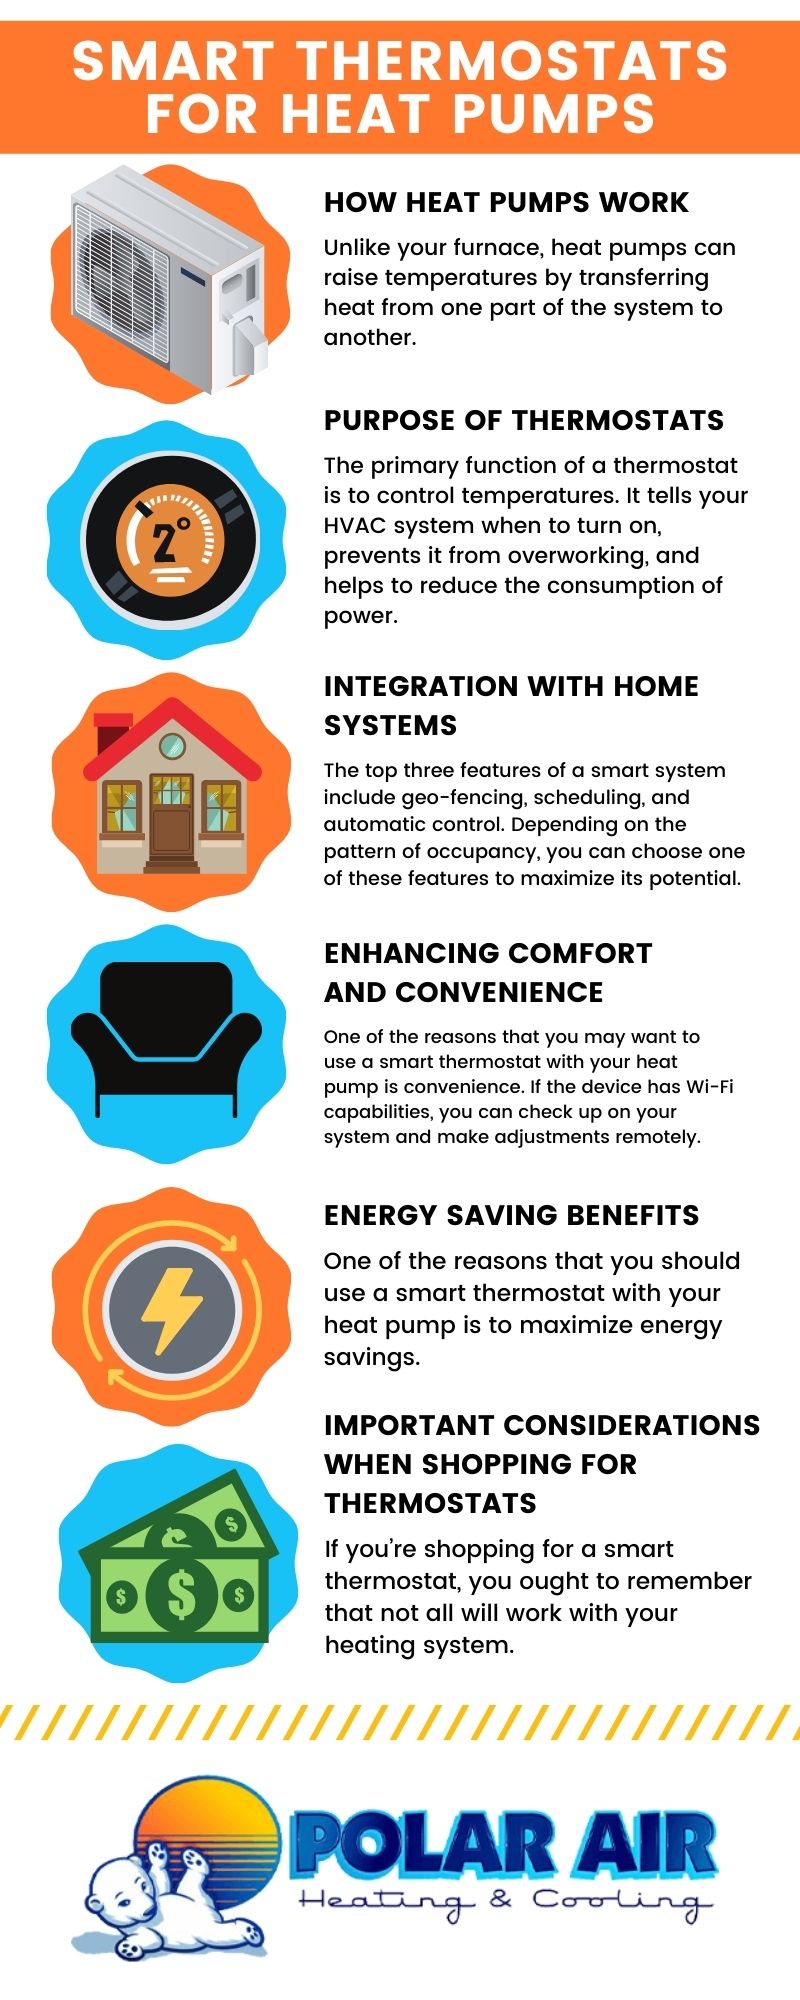 Smart Thermostats for Heat Pumps